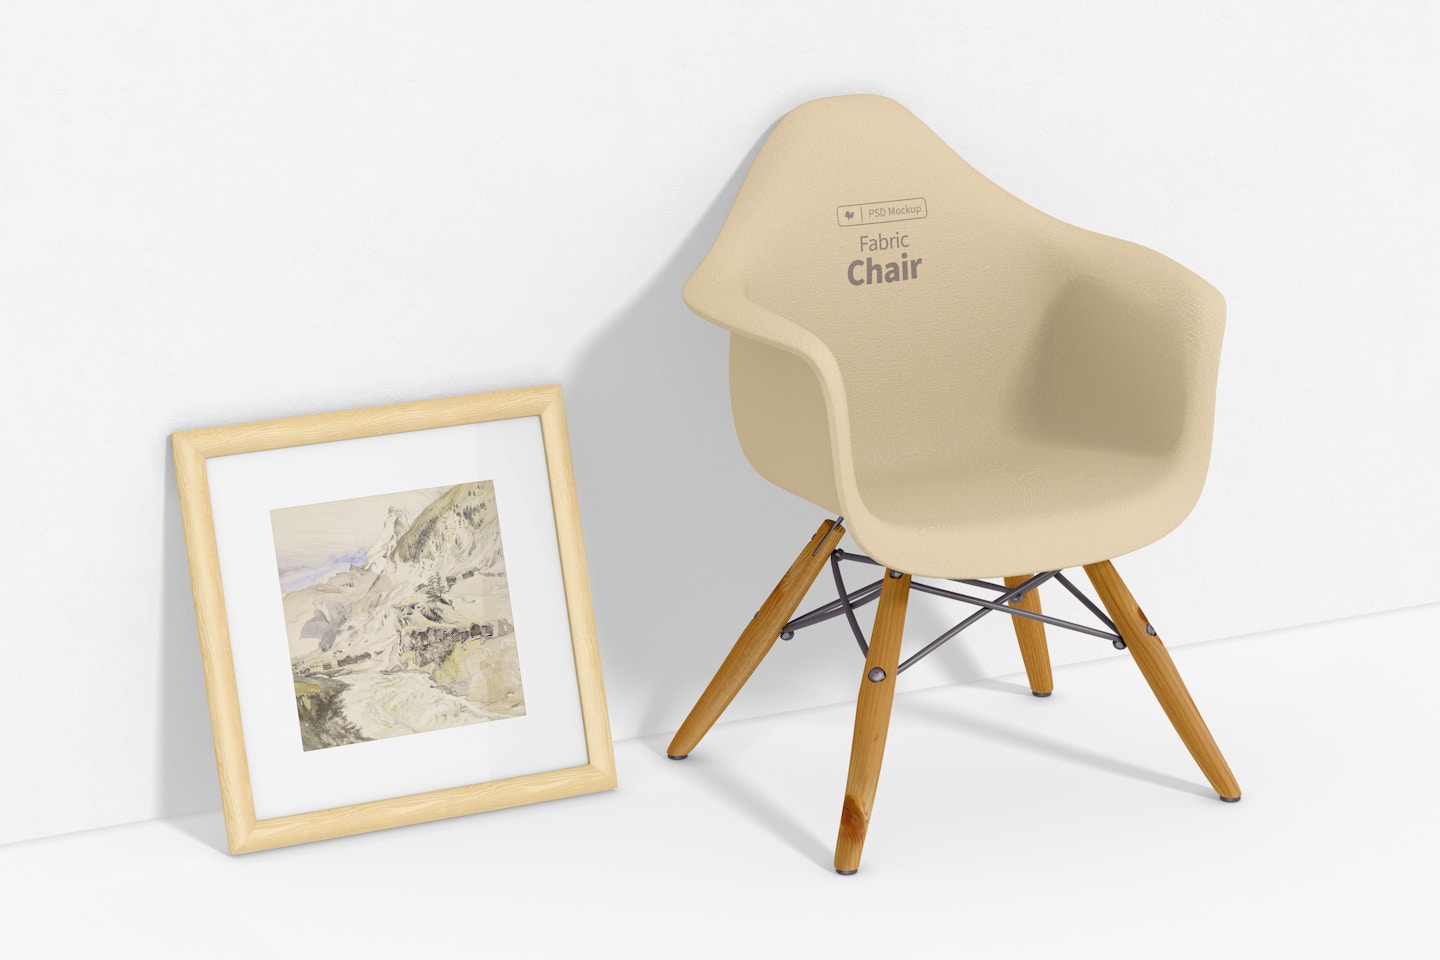 Square Frame with Fabric Chair Mockup, Left View